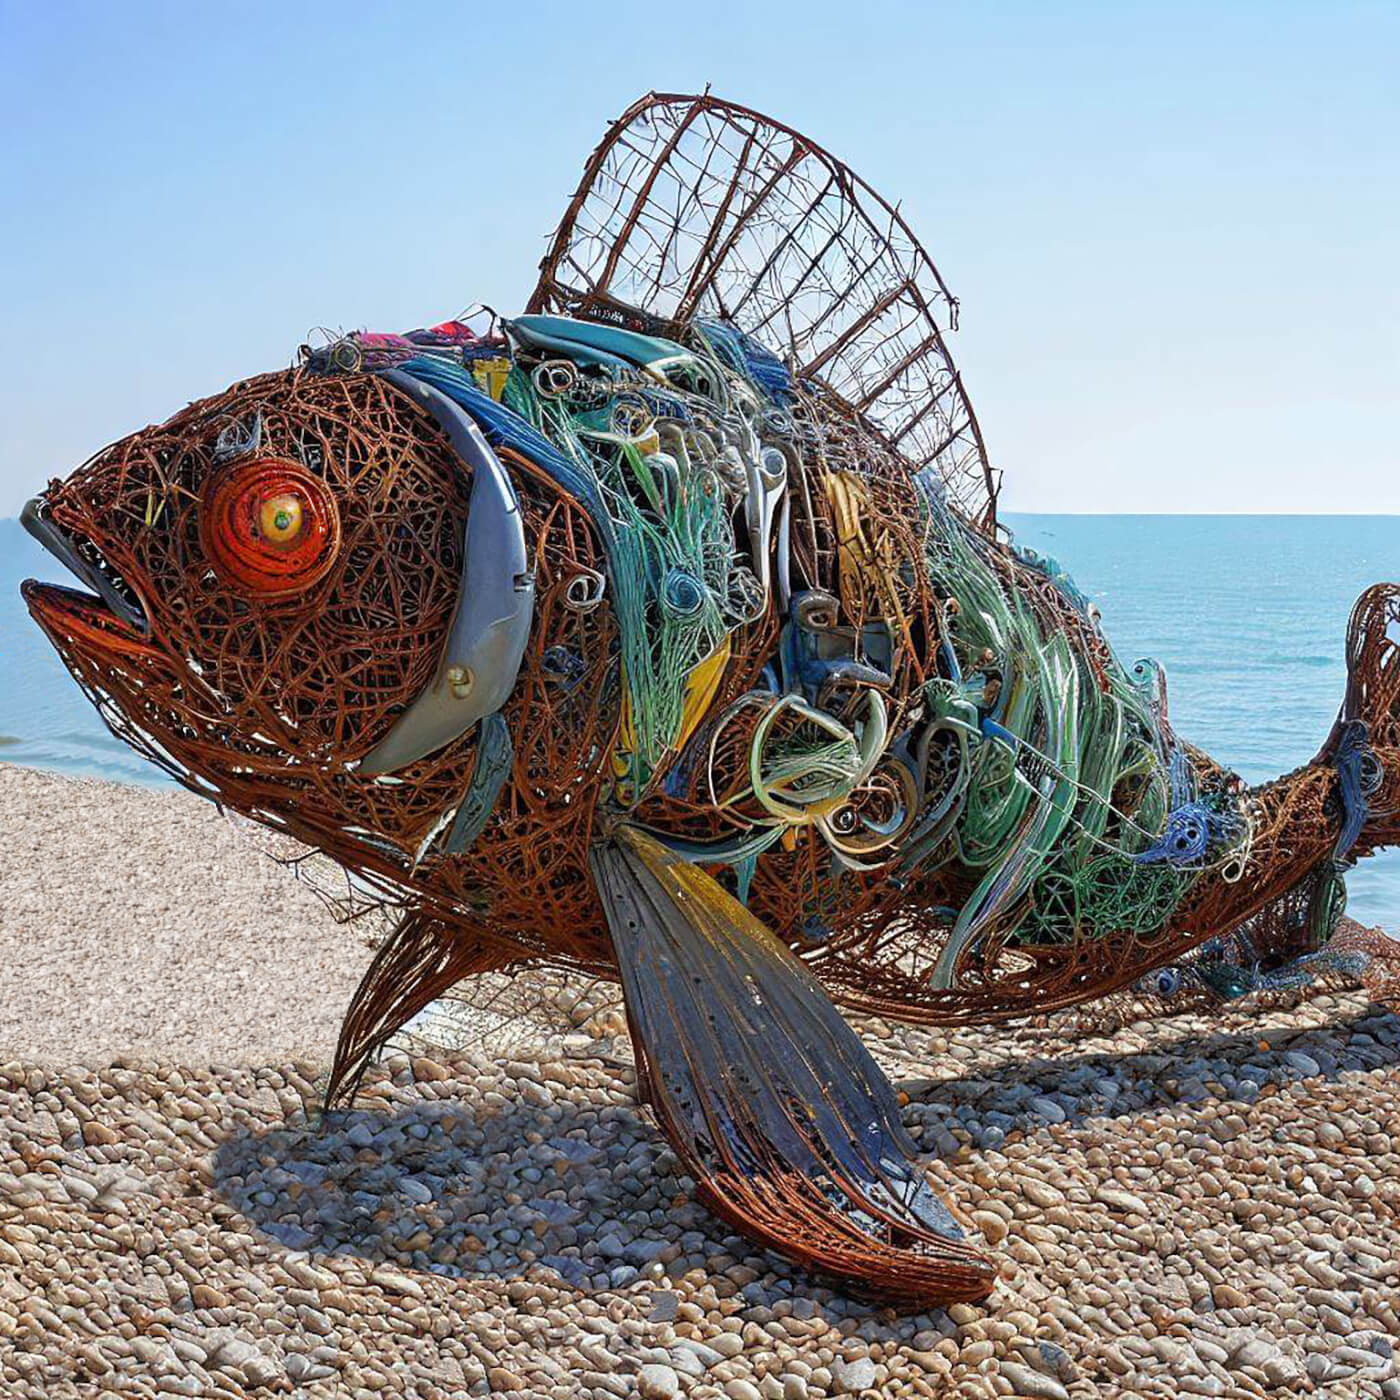 A sculpture made from fishing gear collected by humans while hunting for scavengers